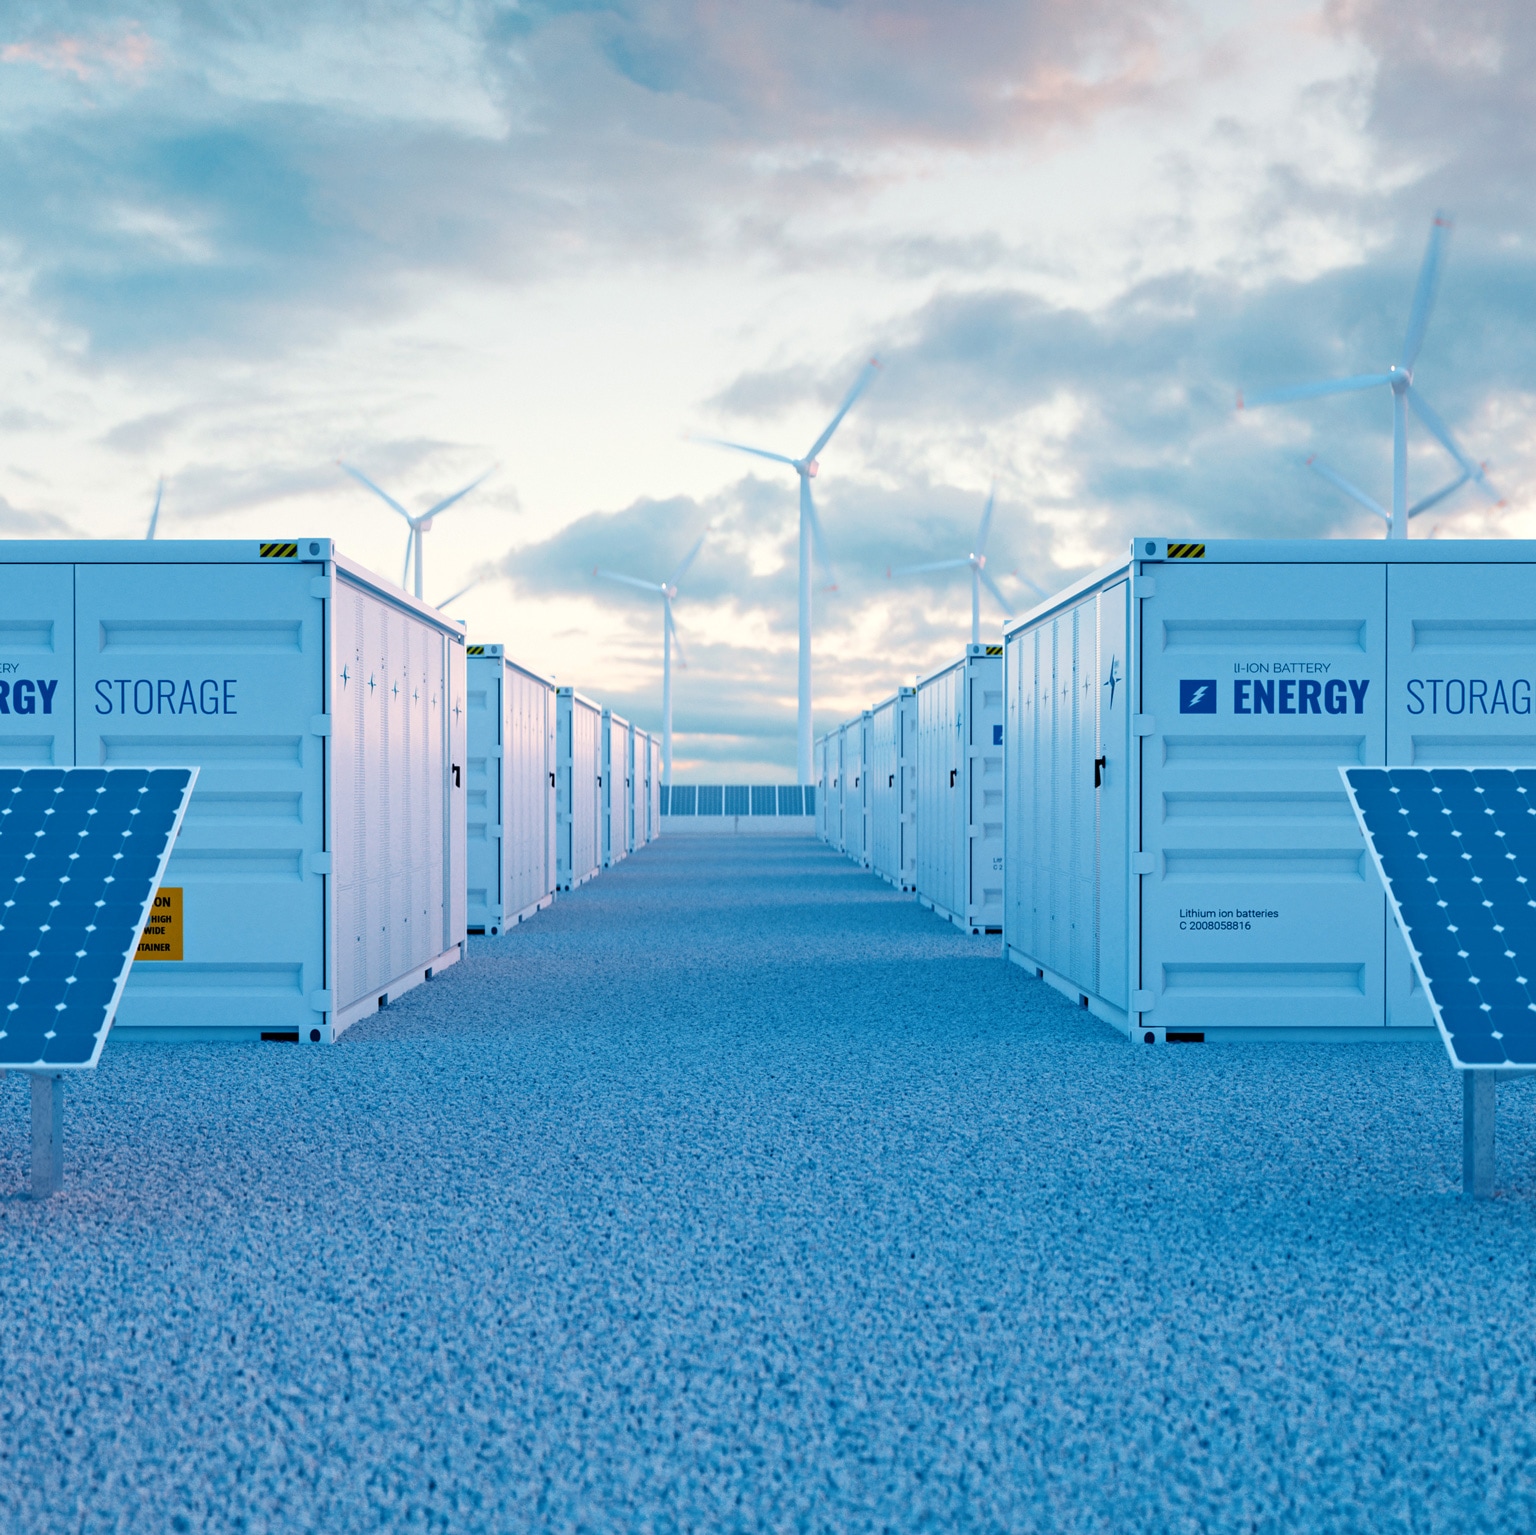 More in common: Europe's energy storage associations' unified stance - PV  Tech